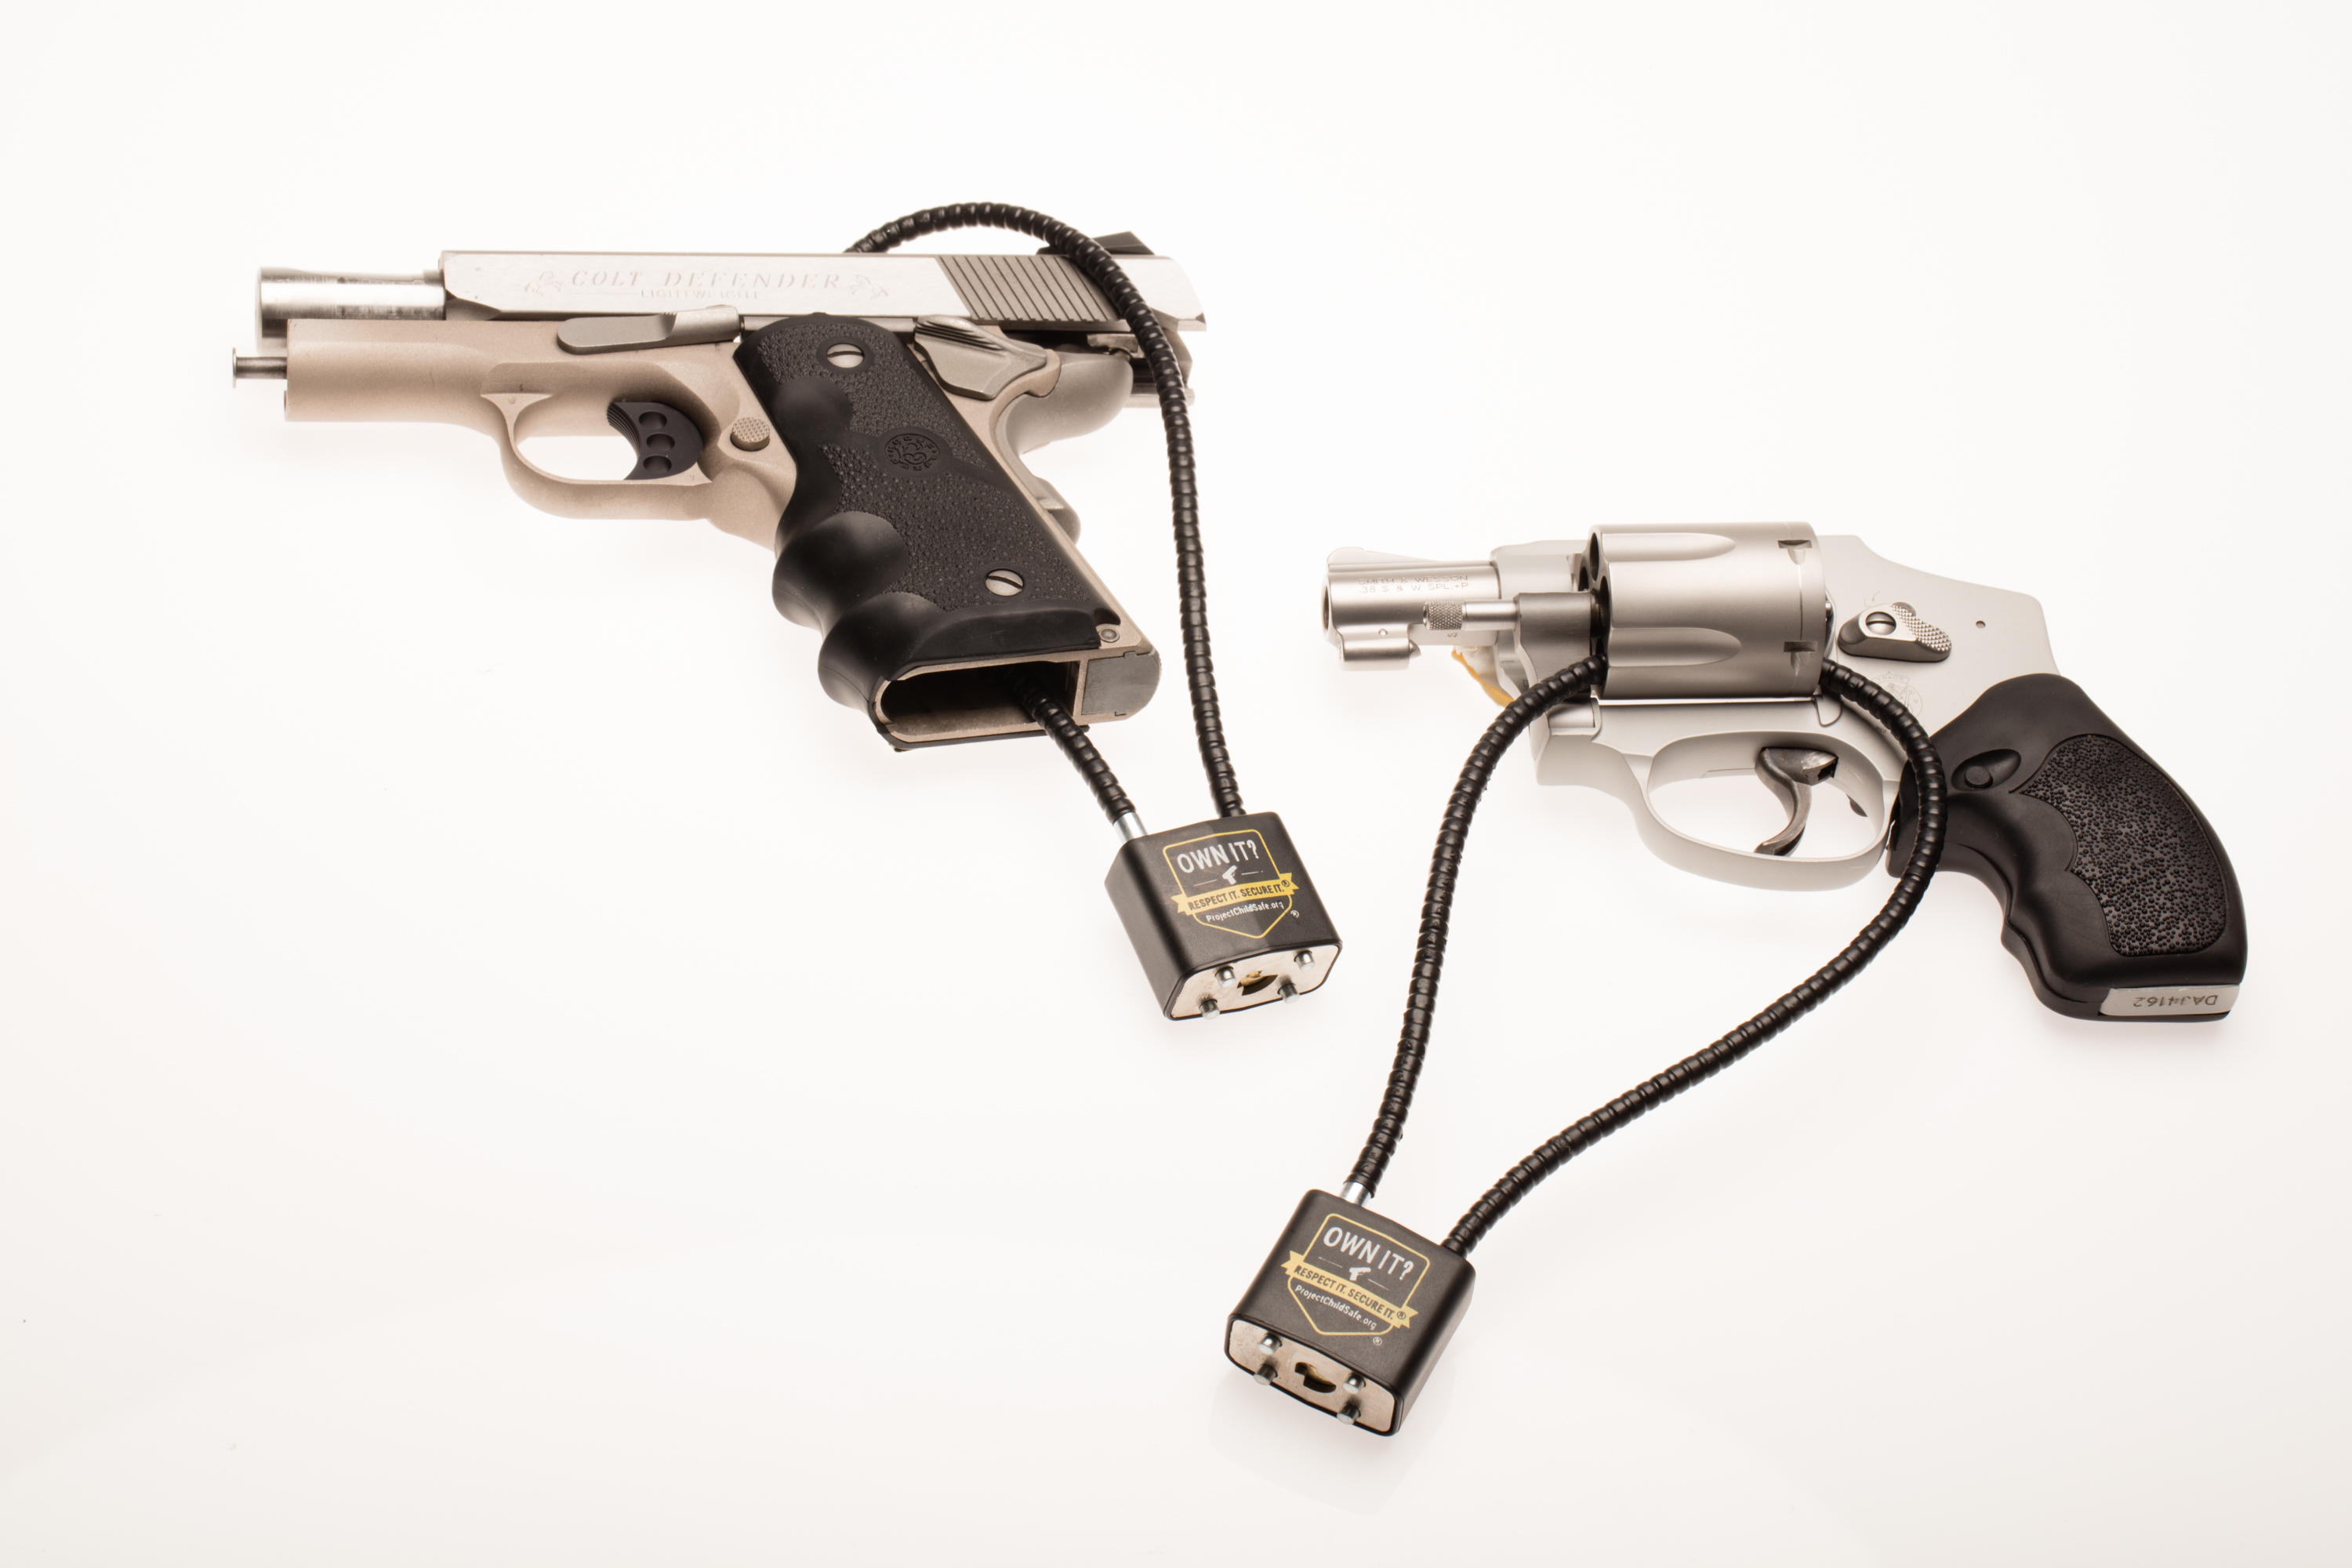 Handguns with Project ChildSafe cable locks